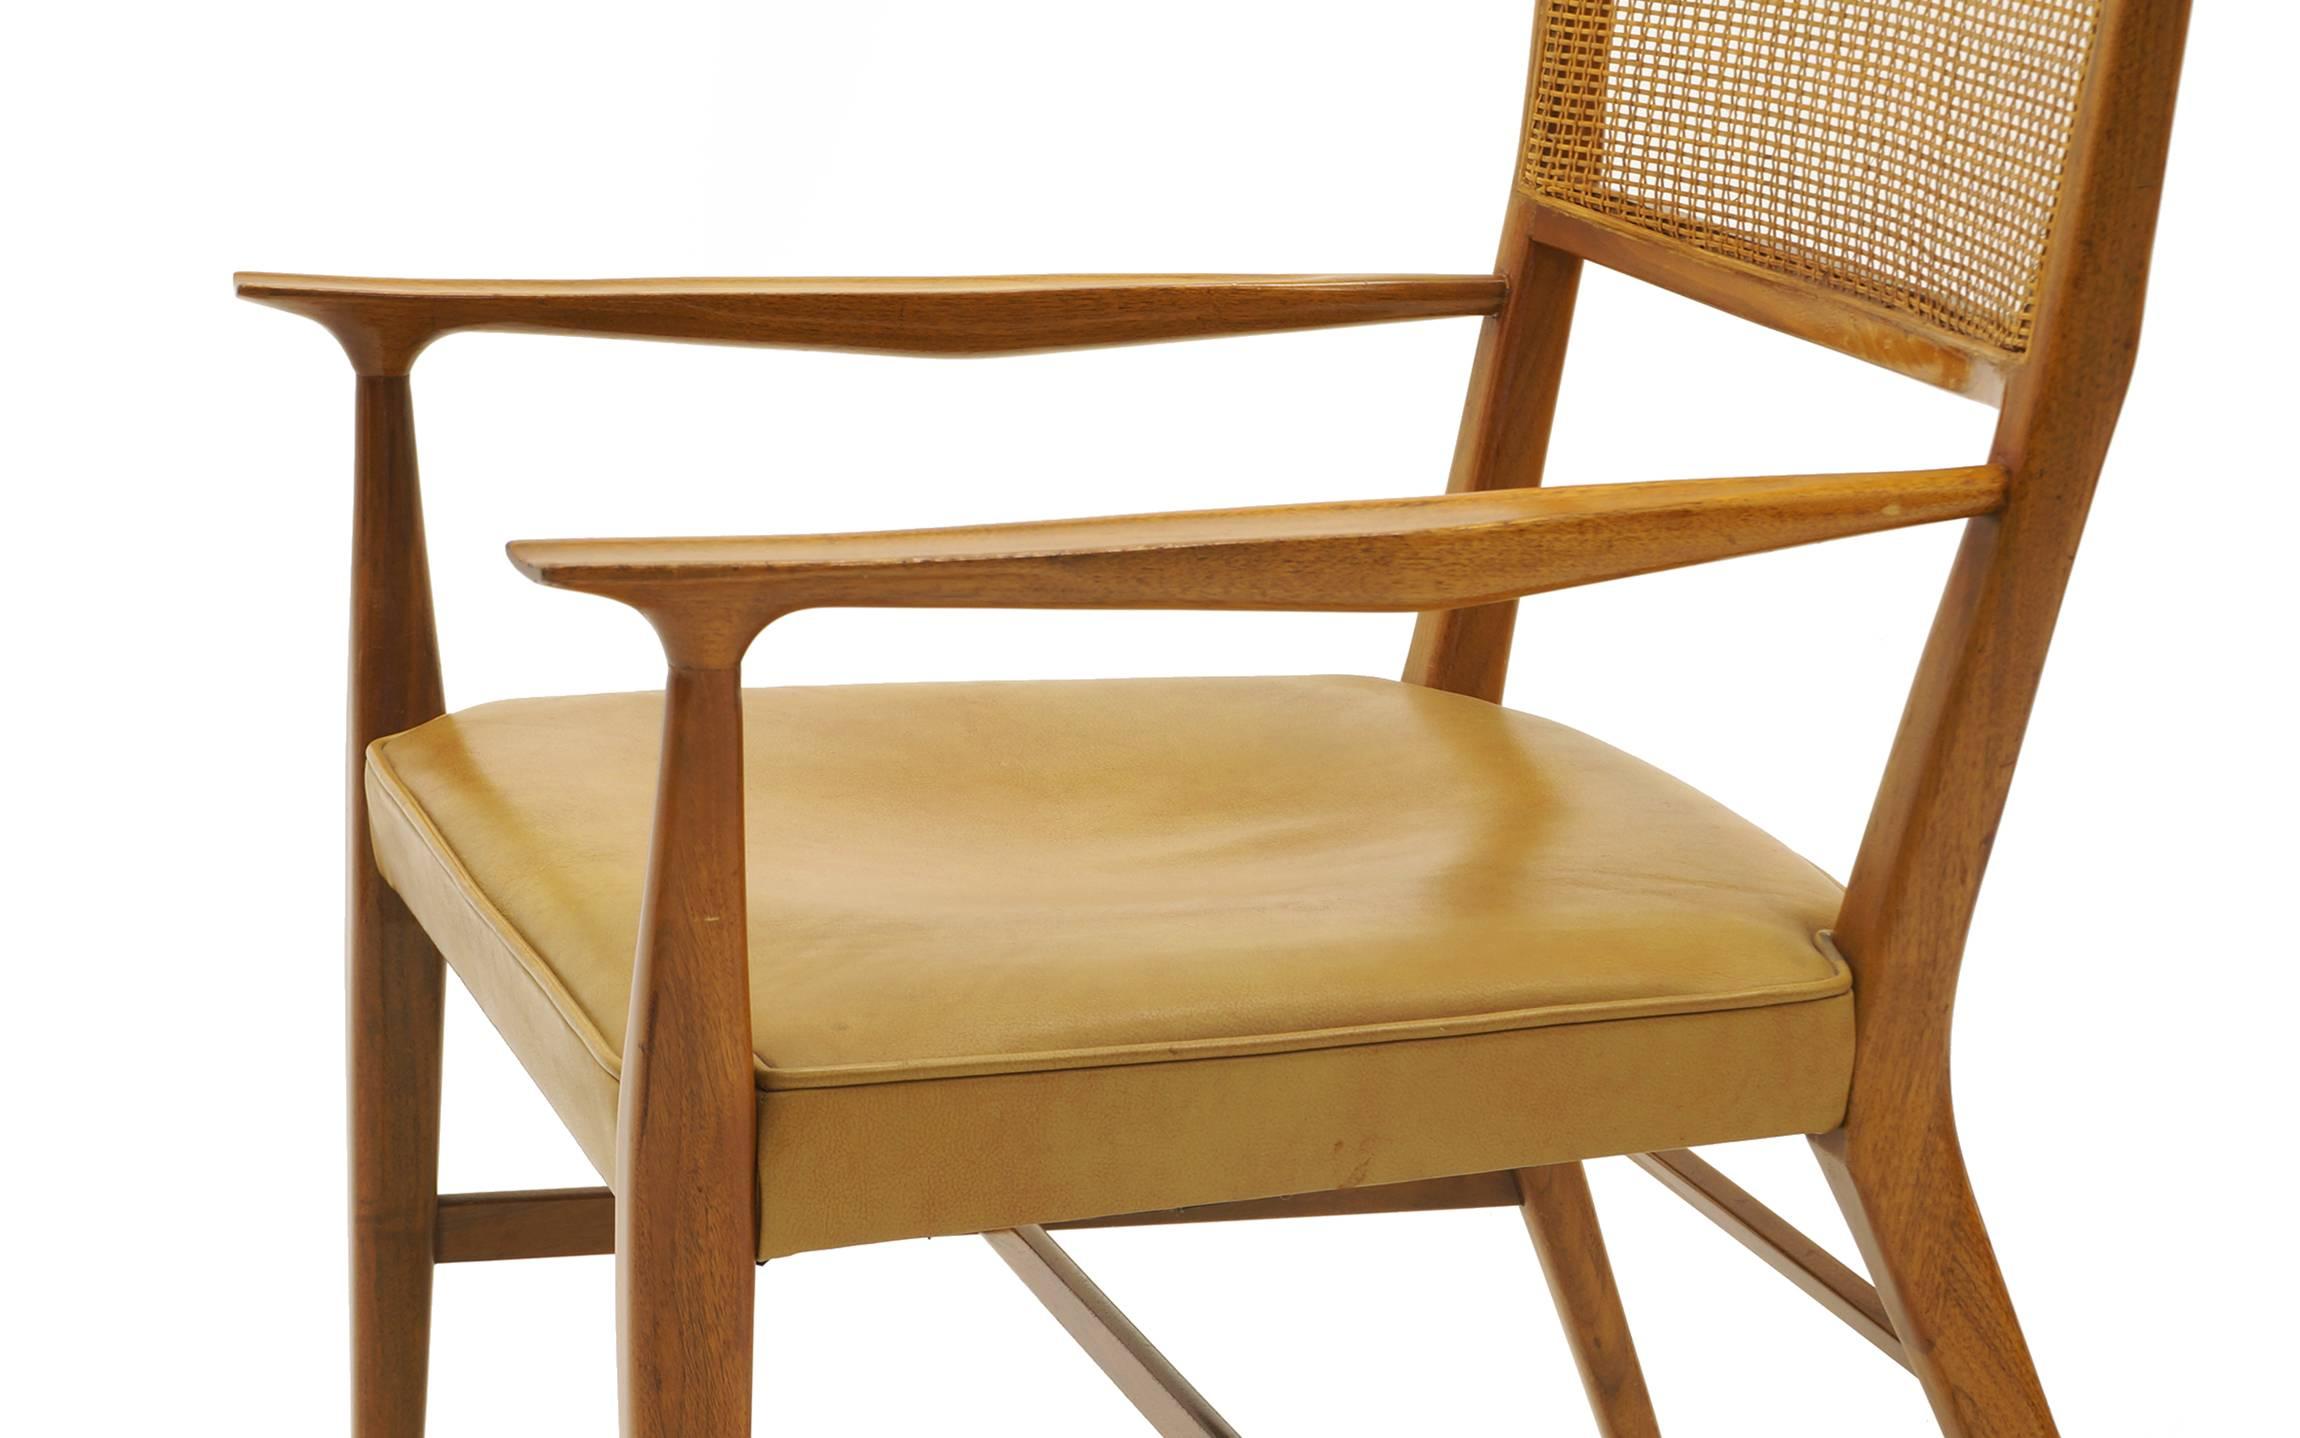 Mid-20th Century Pair of Paul McCobb Dining chairs from The New England Collection.